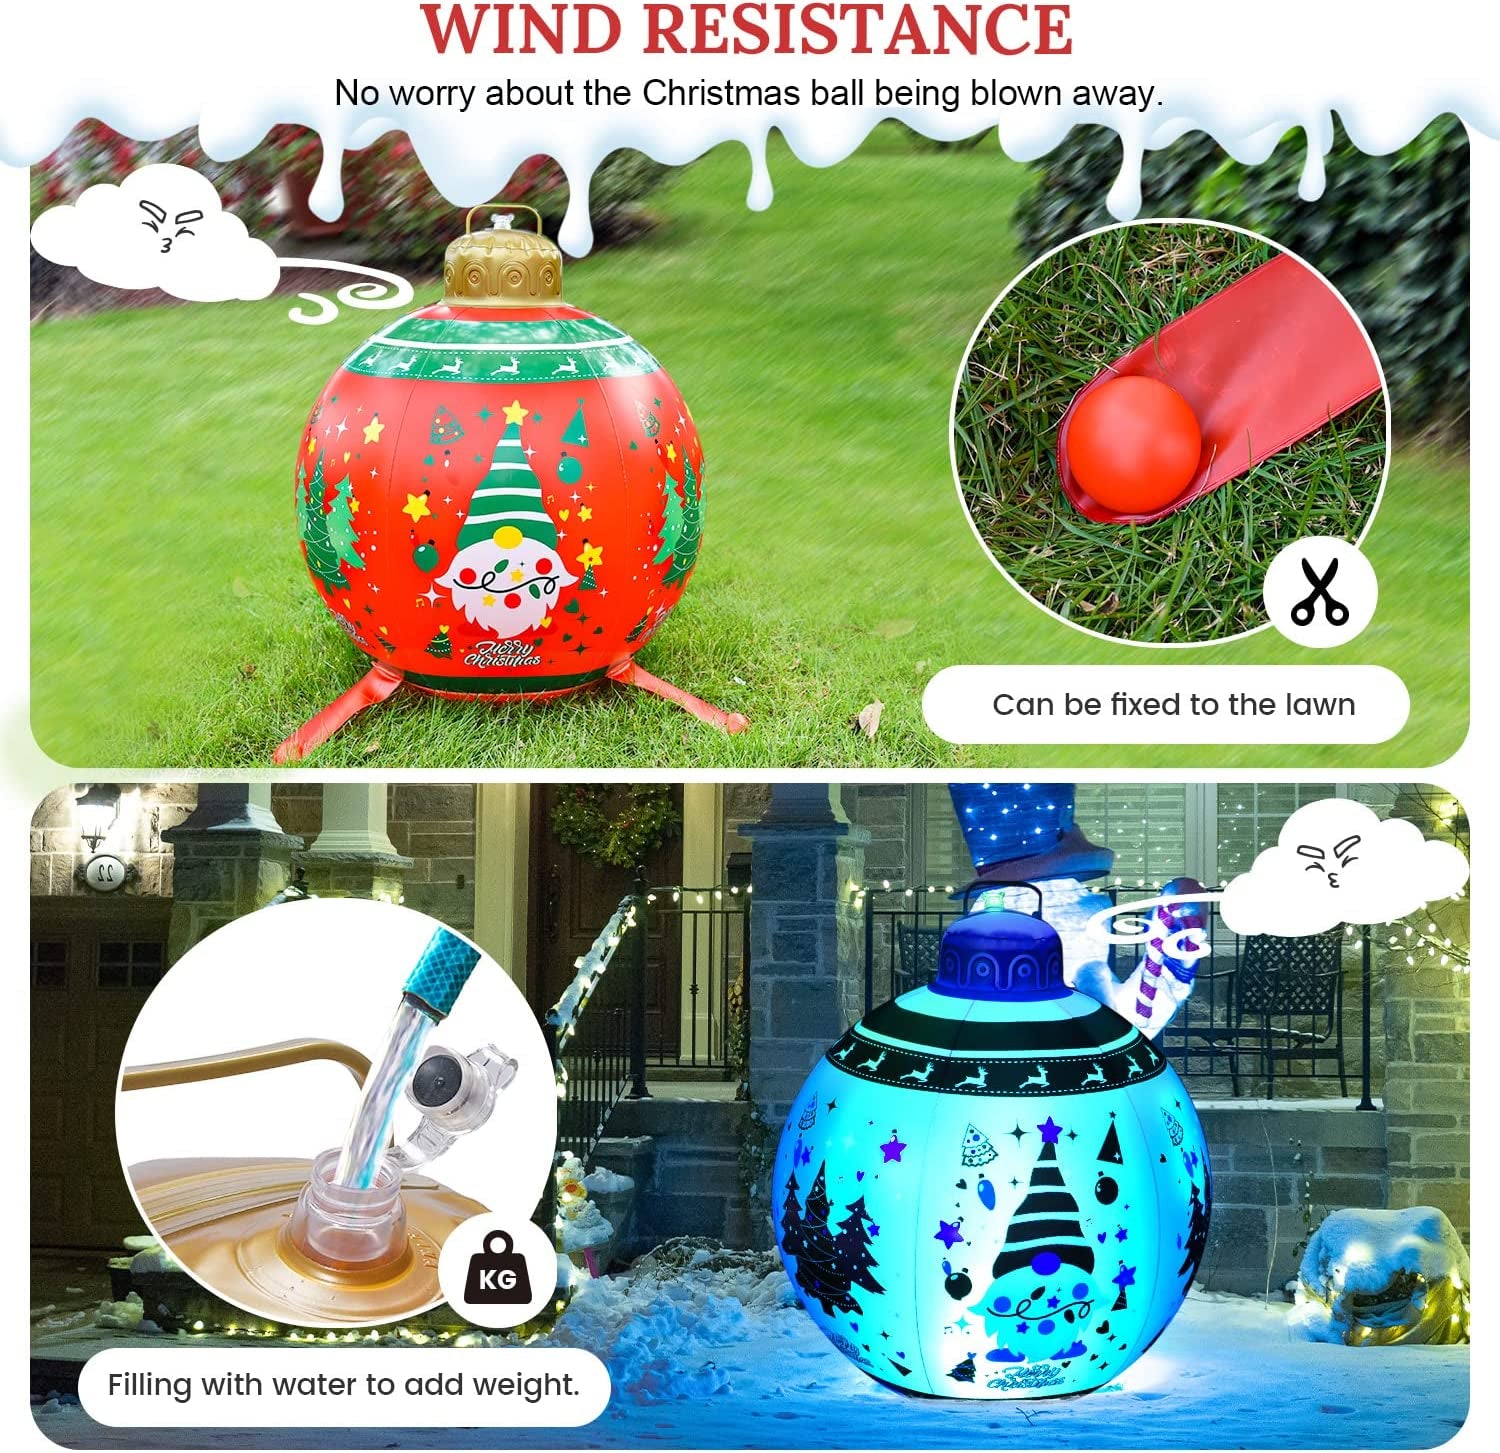 20 Inch Inflatables Christmas Ornament Ball Large Outdoor Christmas Blow up Yard Decorations with LED Lights and Remote Control for outside Holiday Yard Lawn Garden Decor